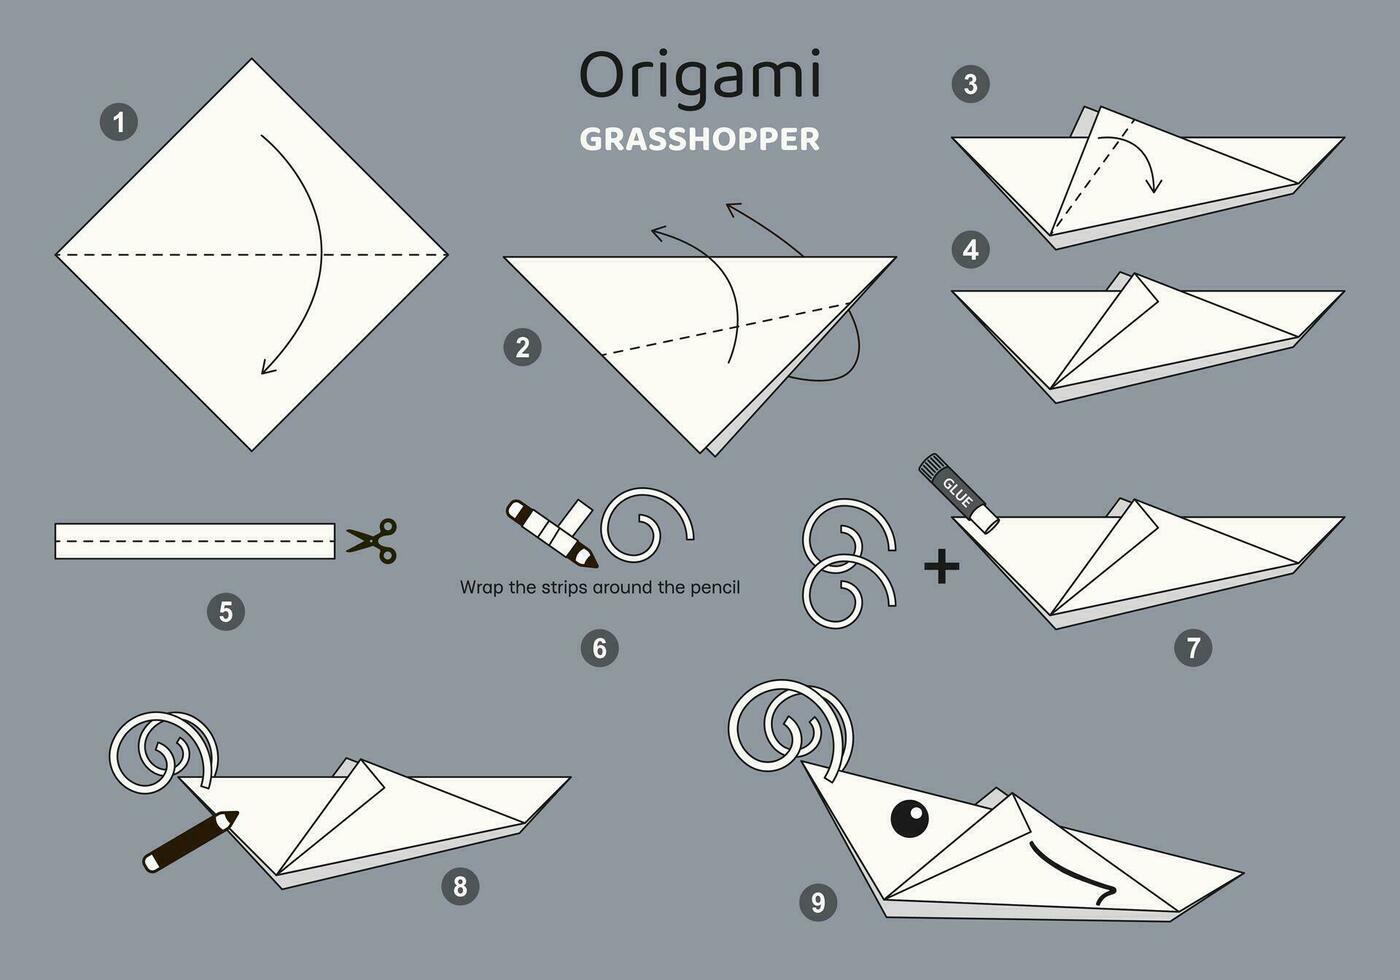 Grasshopper origami scheme tutorial moving model on grey backdrop. Origami for kids. Step by step how to make a cute origami grasshopper. Vector illustration.